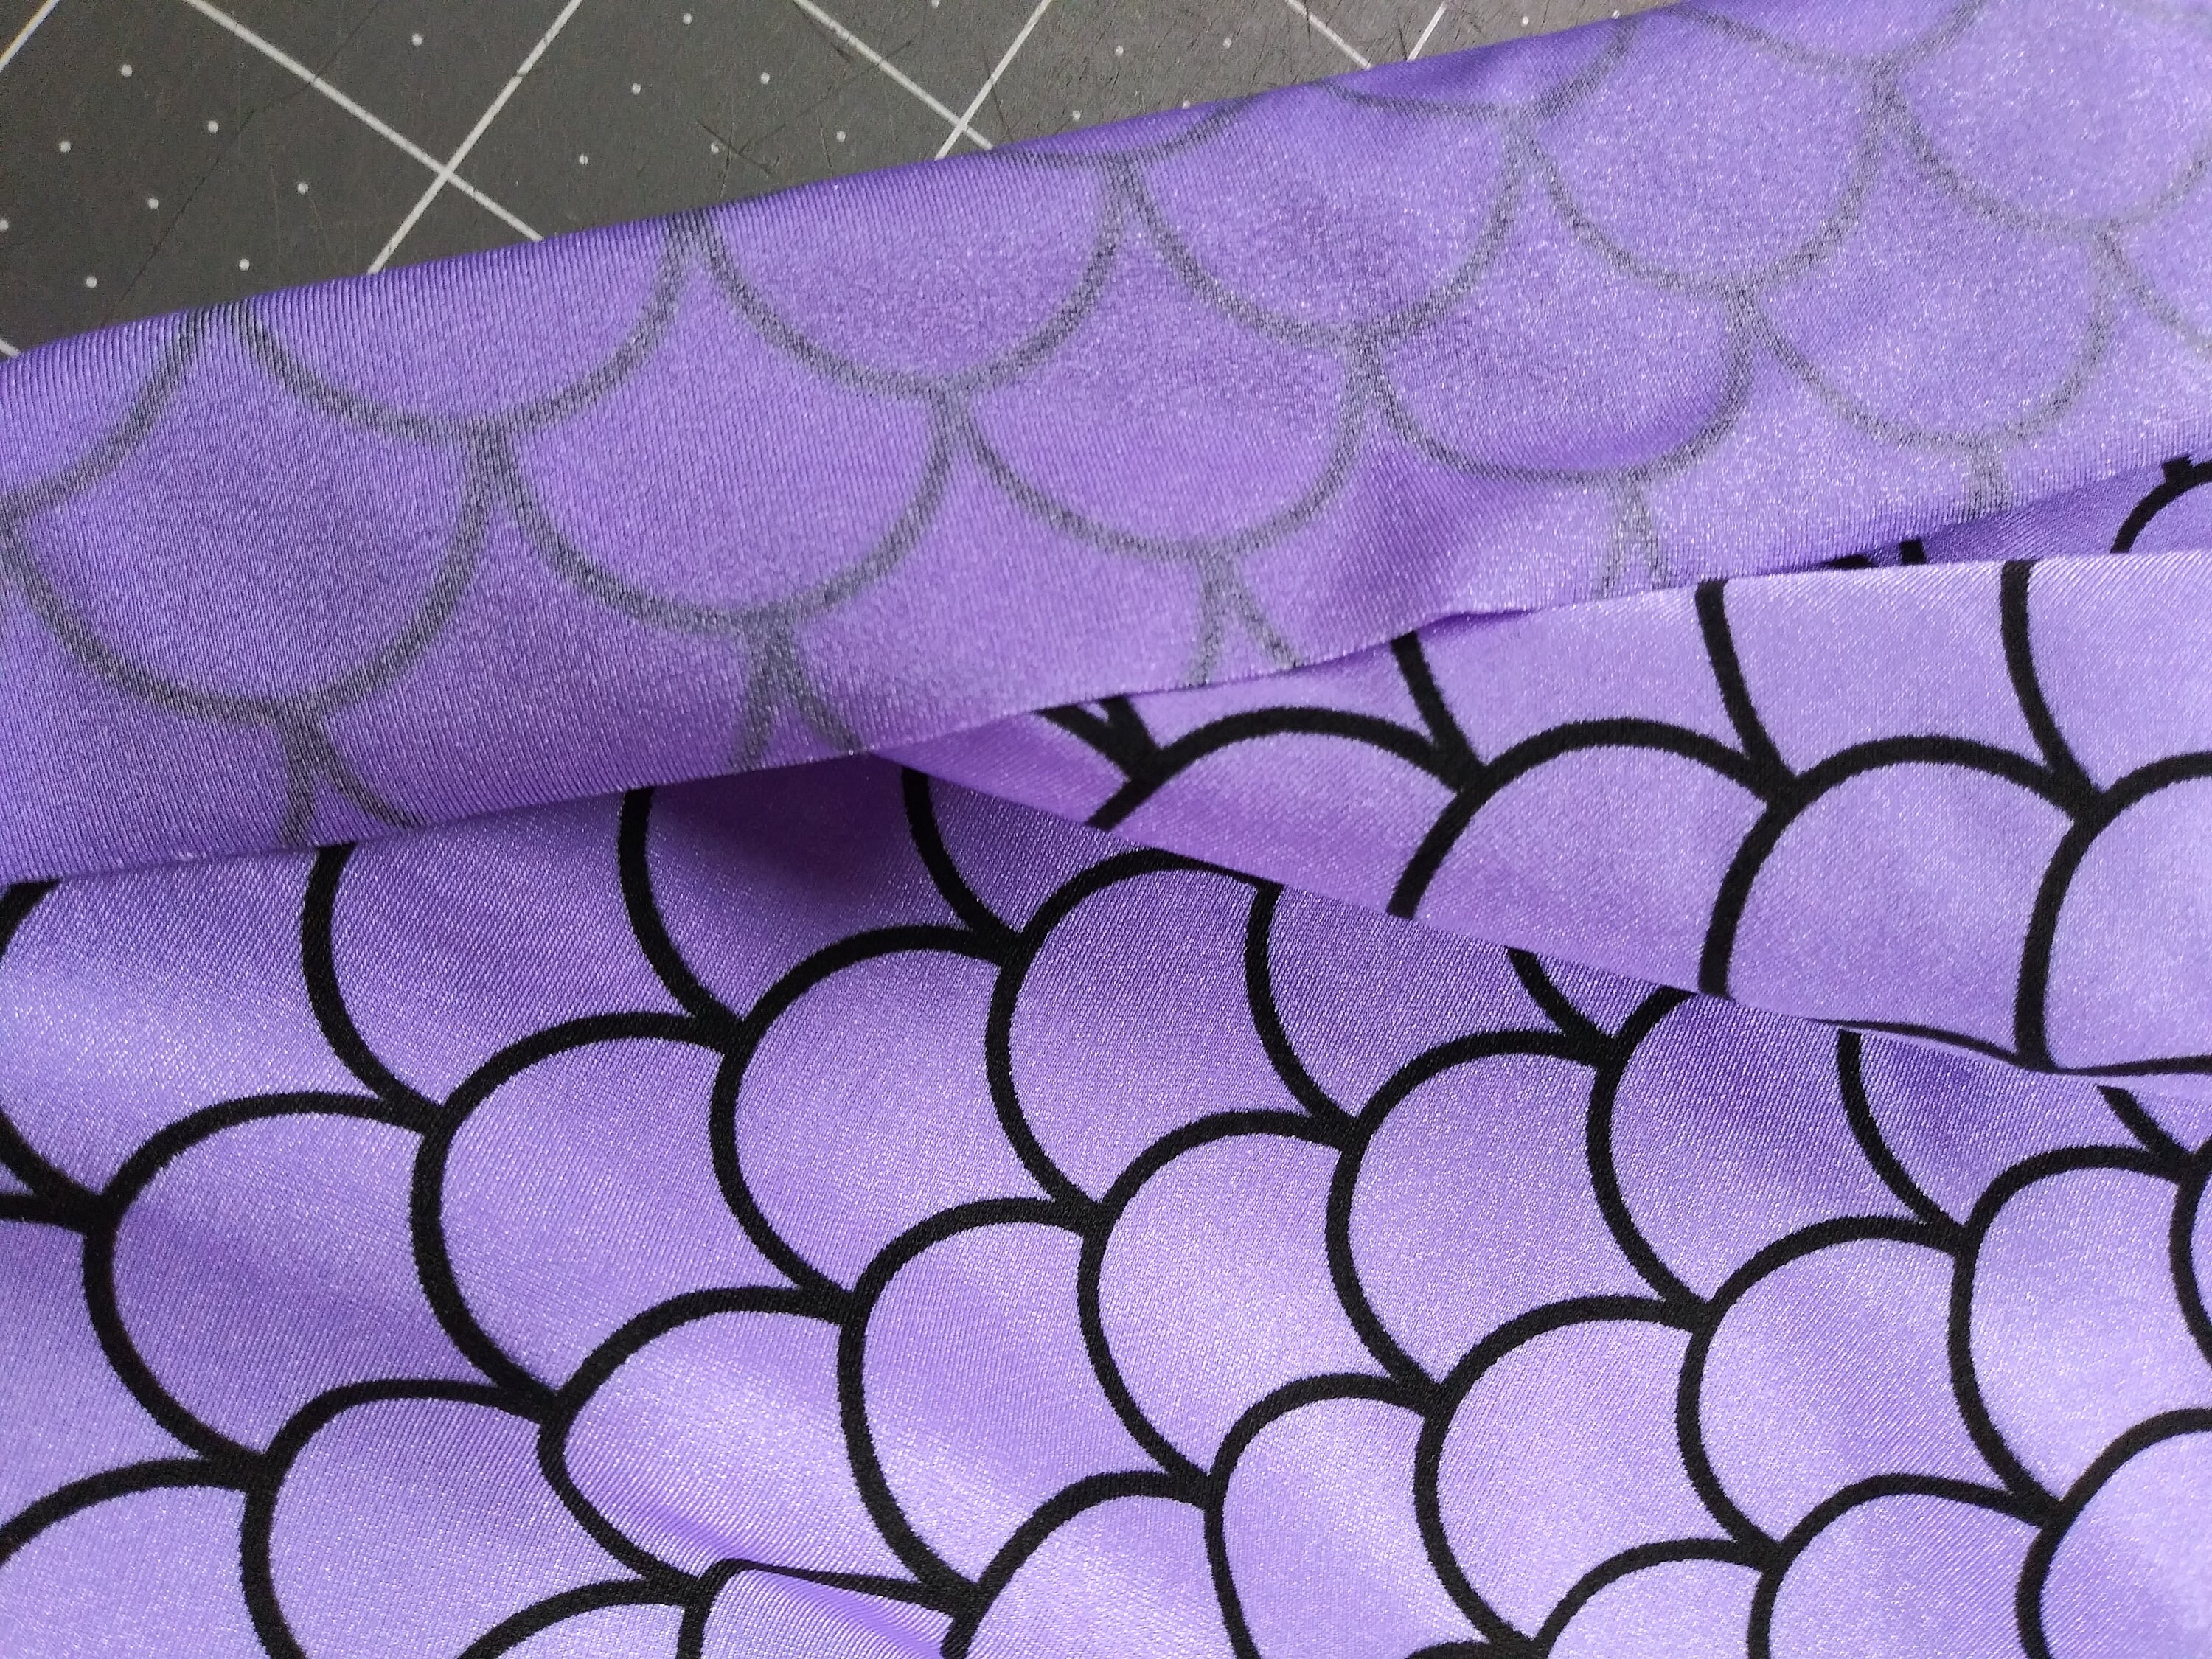 FINGERINSPIRE Mermaid Scales Fabric 39x59 inch Orchid Purple Hologram 2 Way  Stretch Fish Scale Fabric Sparkly Spandex Mermaid Printed Fish Scale